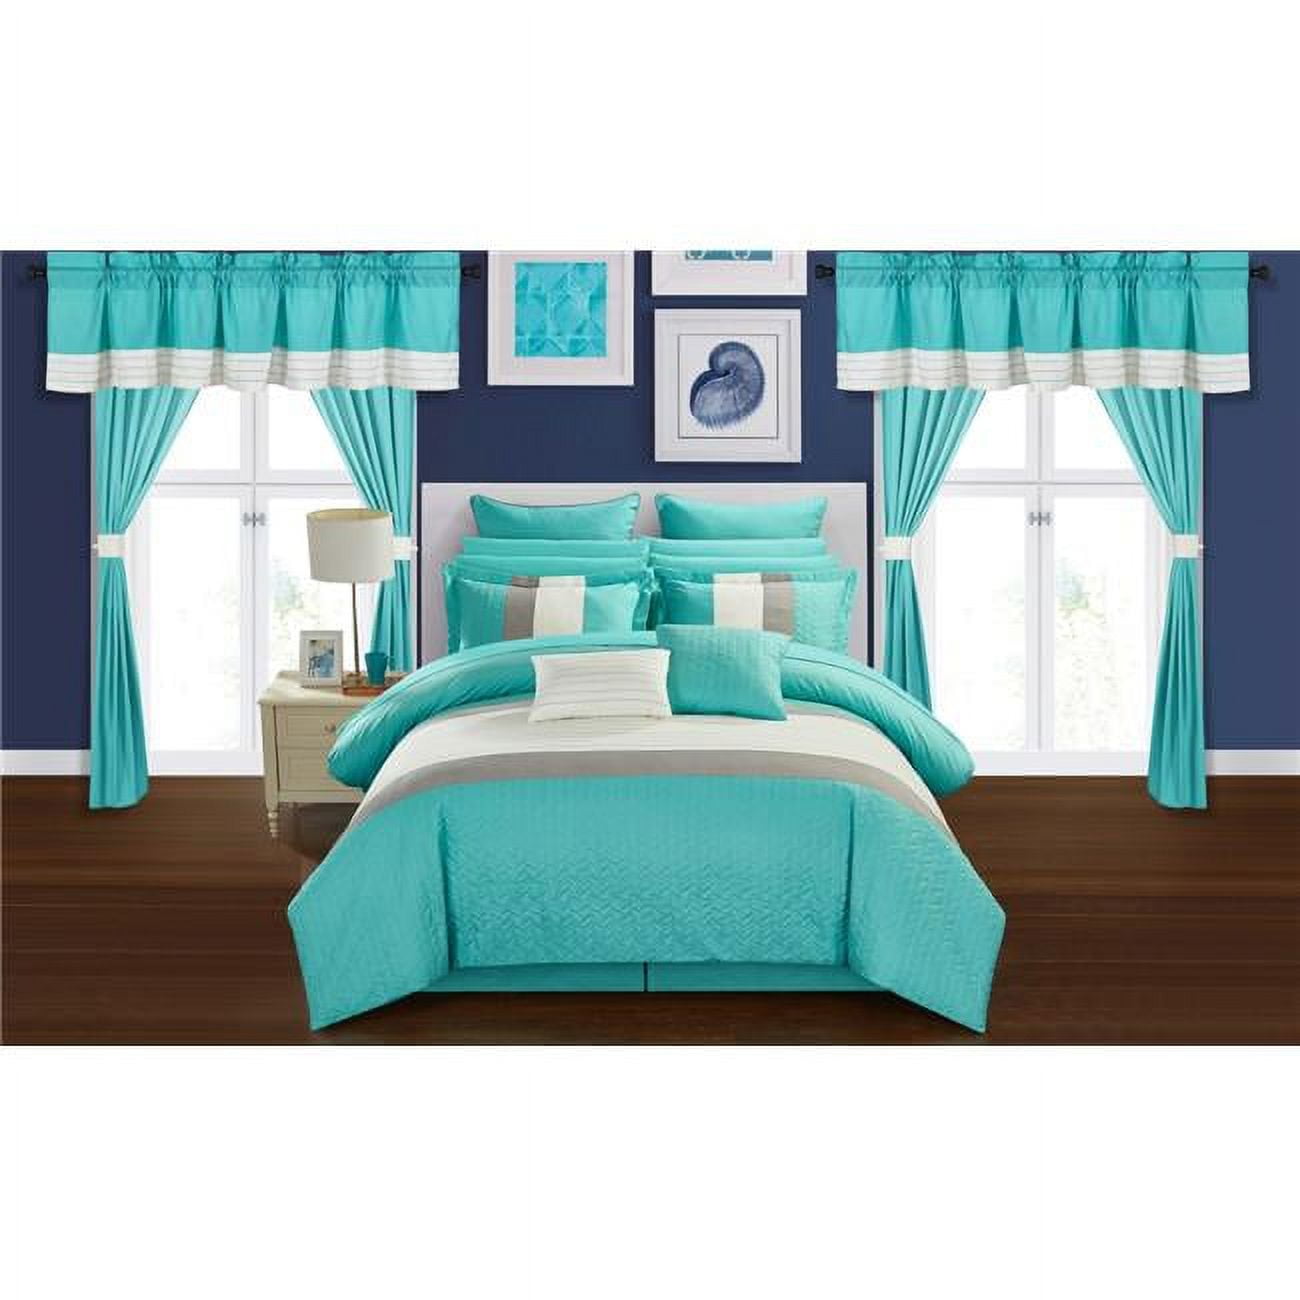 Cs0856-us 24 Piece Quilted Embroidered Complete Comforter Bed Set, Turquoise